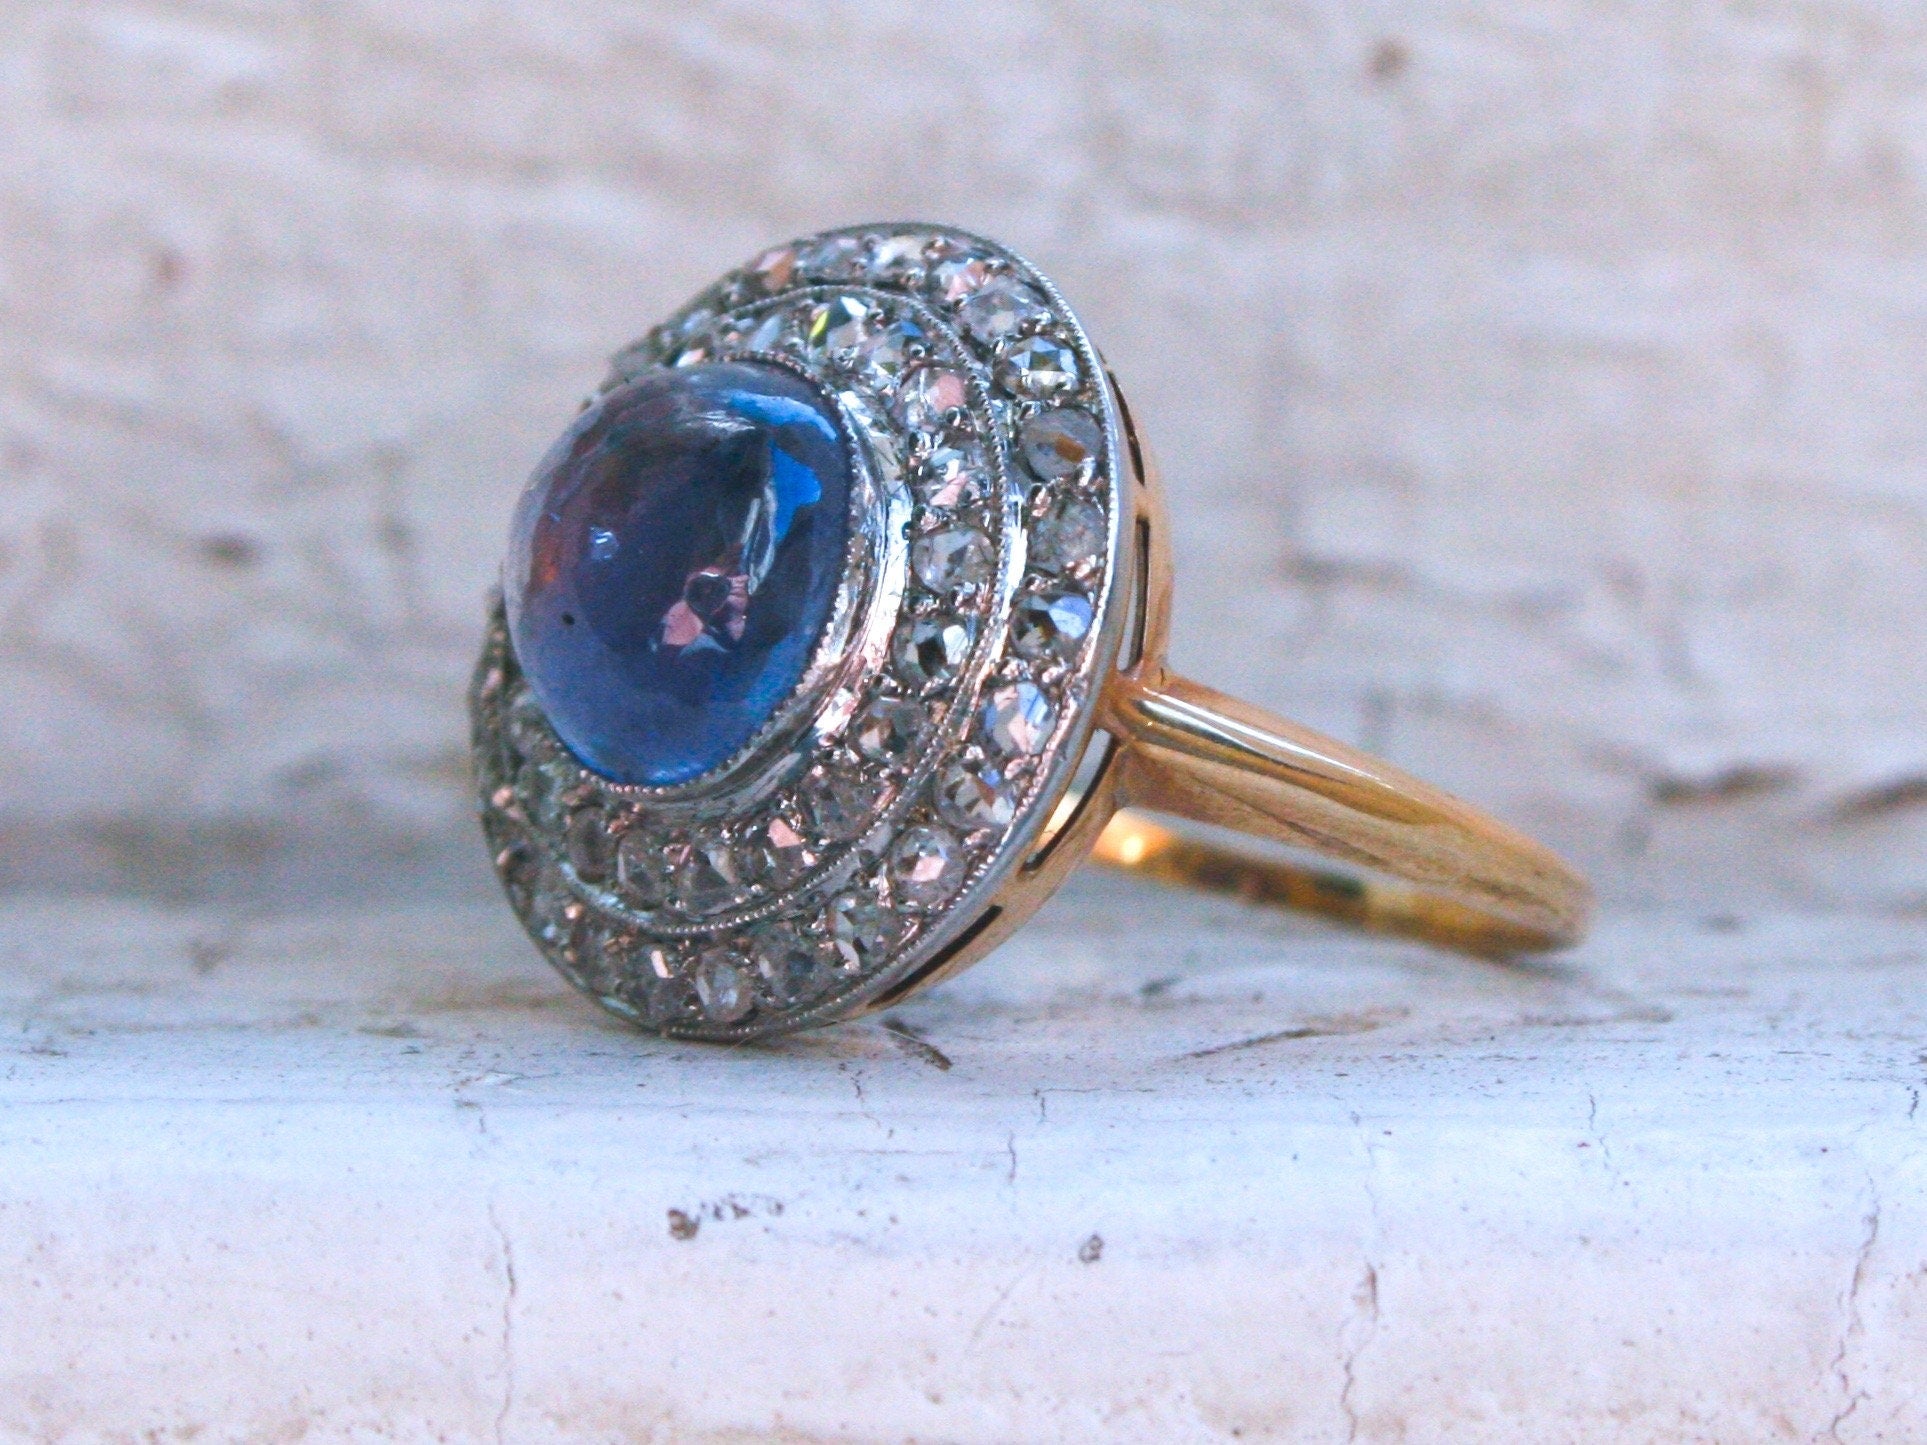 Beautiful Antique 14K Yellow Gold/ Platinum Diamond and Sapphire Cabochon Engagement Ring - 3.69ct.